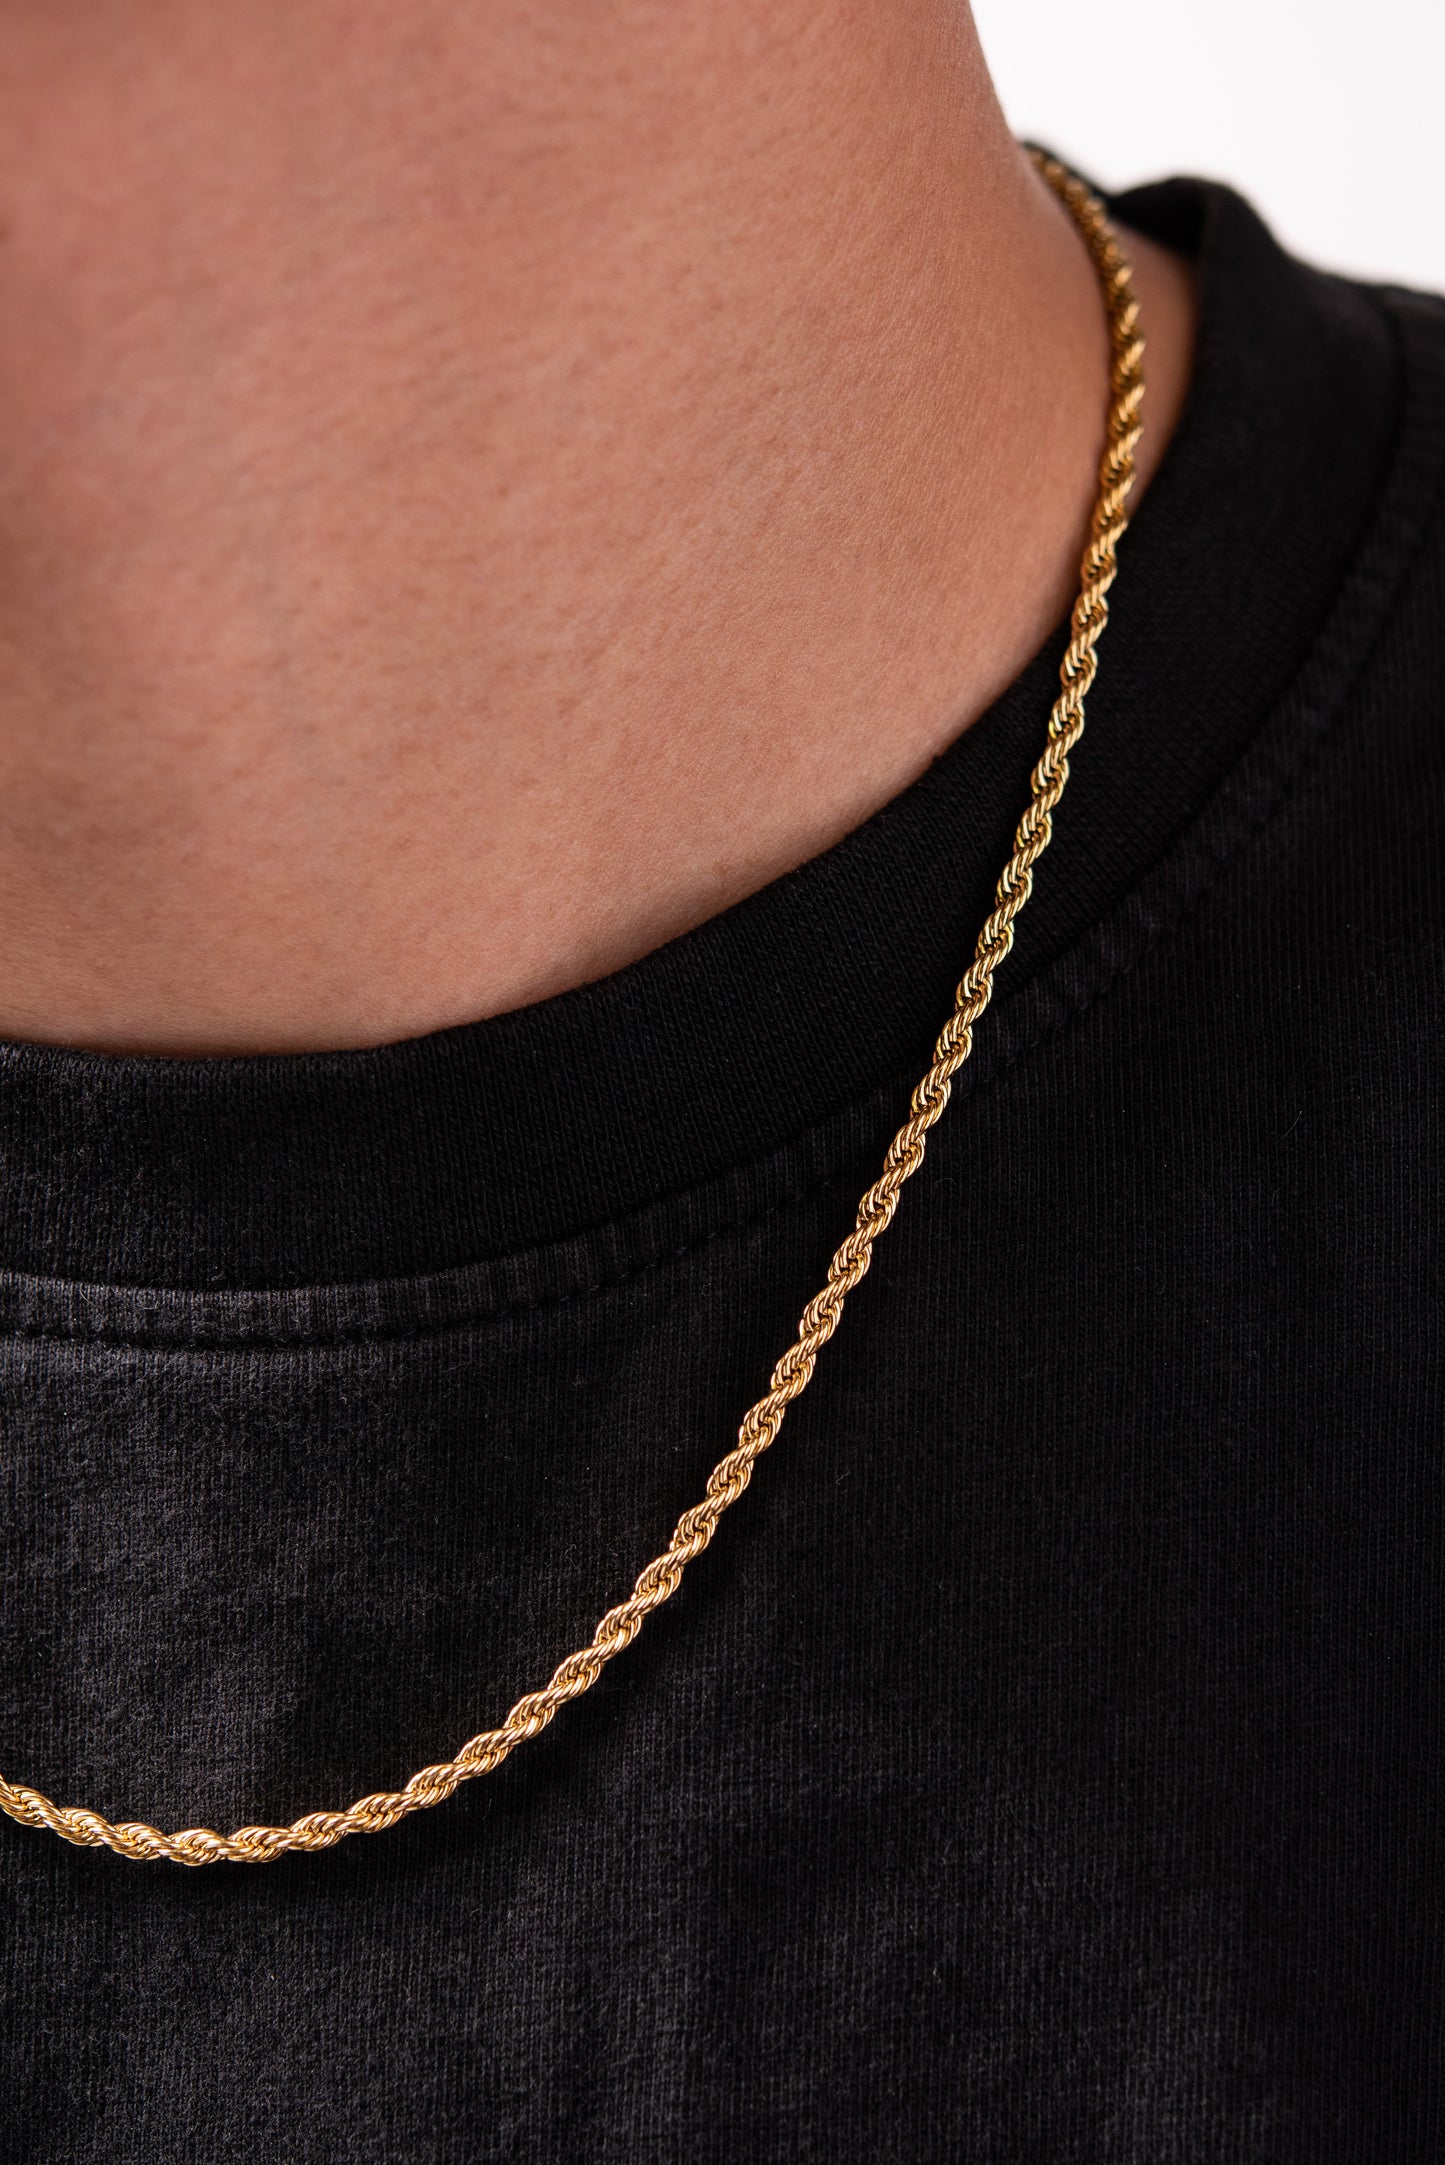 20'' Stainless Steel Rope Chain Necklace - Gold